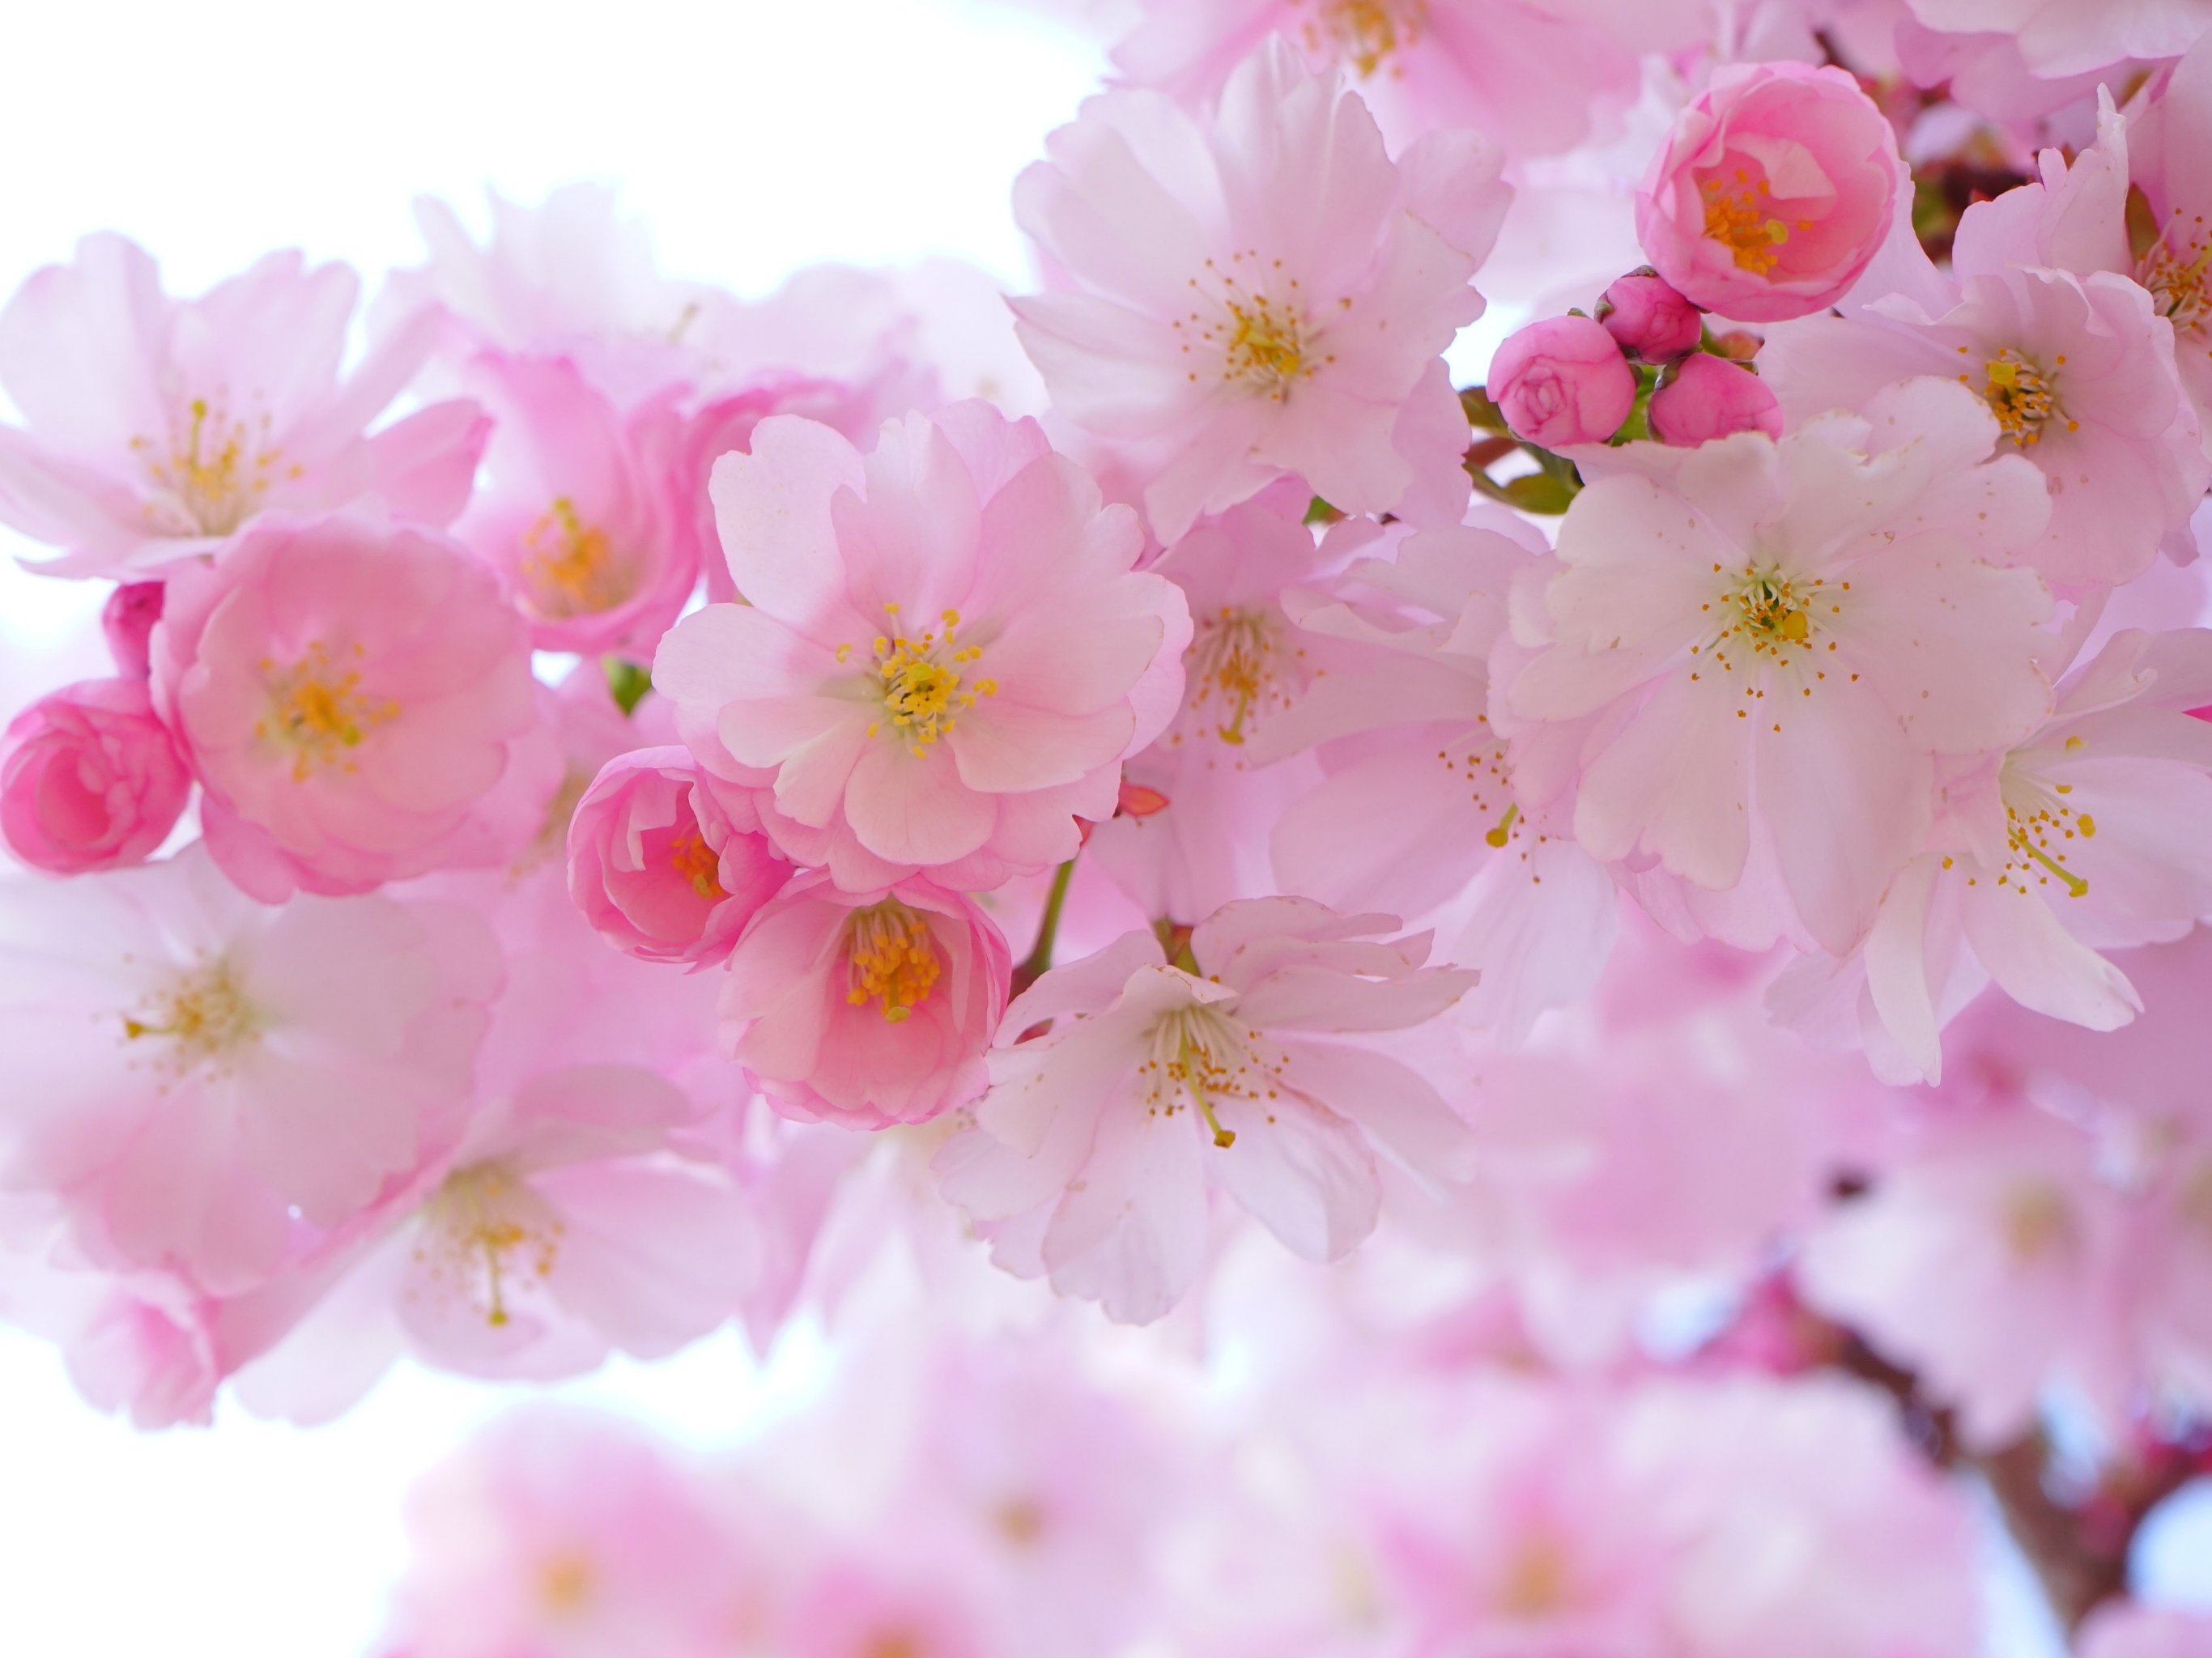 Cherry Blossom Wallpaper - iPhone, Android & Desktop Backgrounds